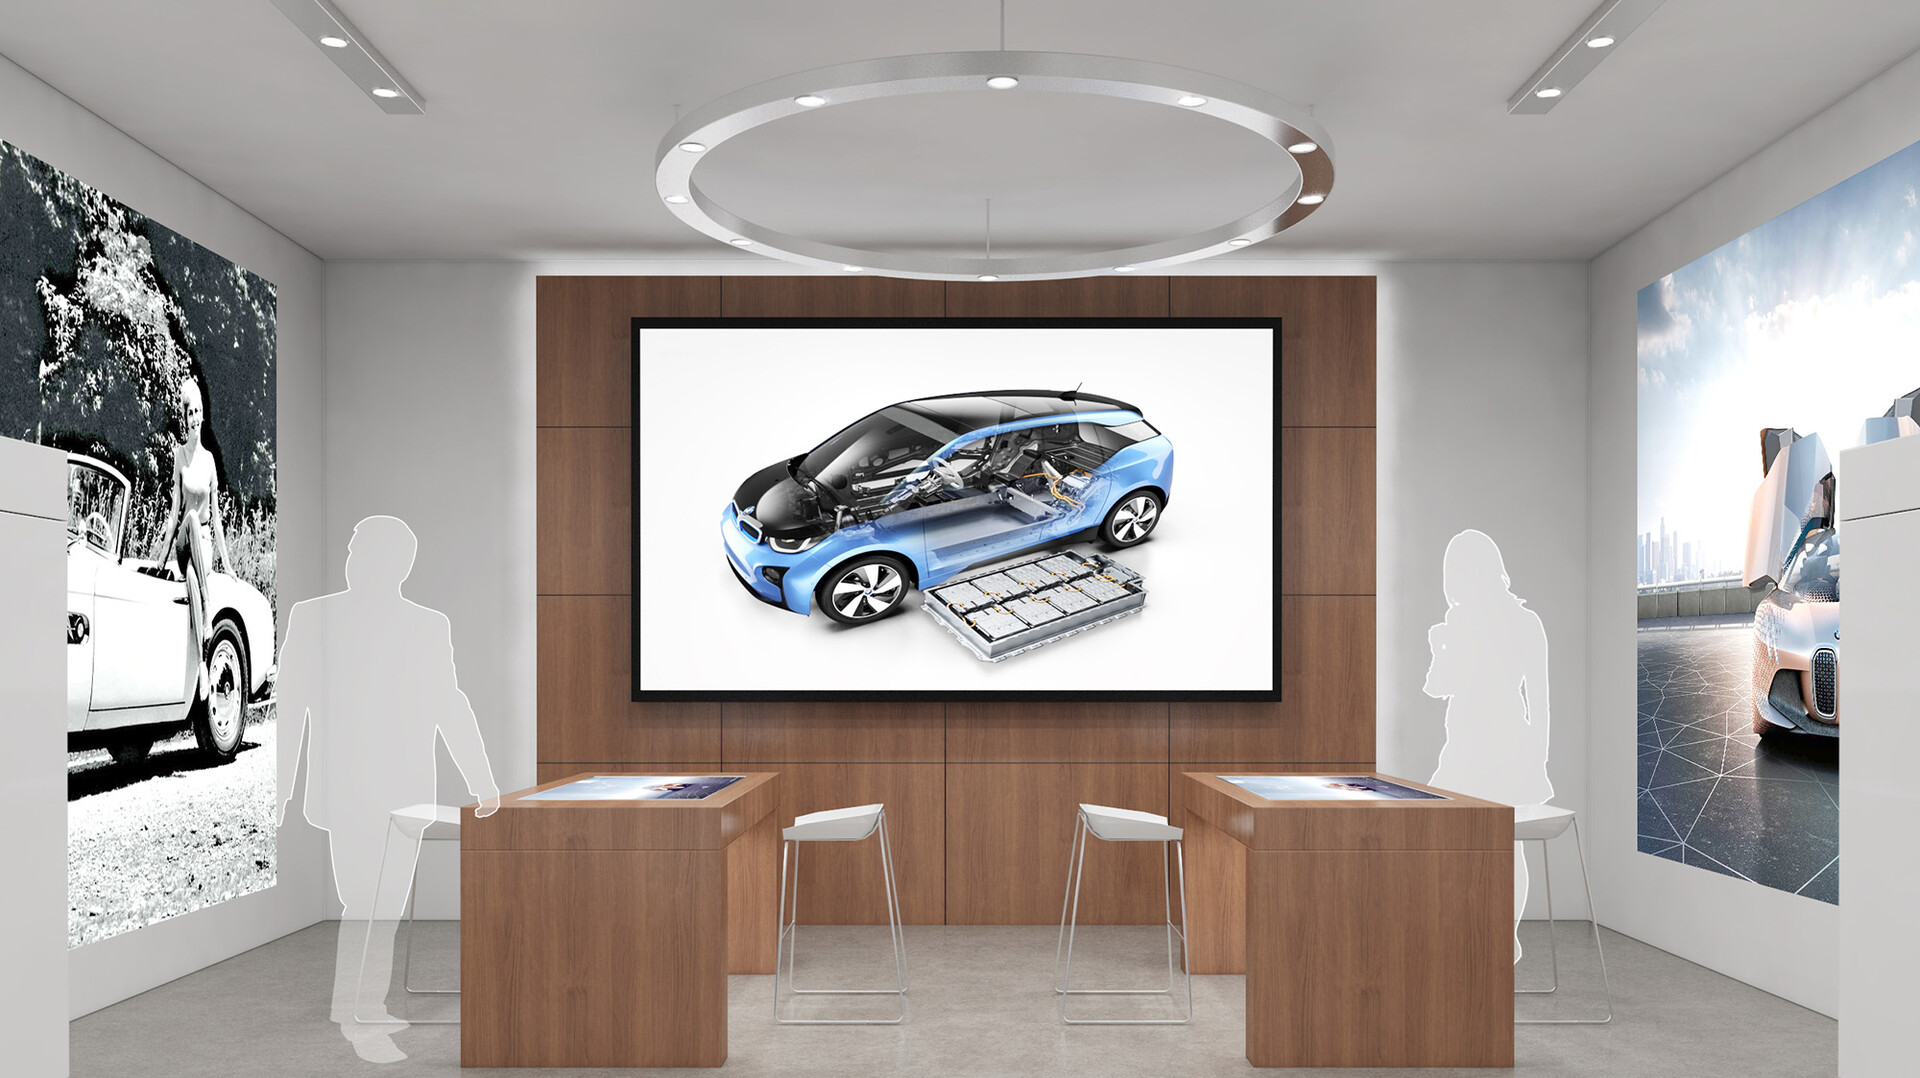 TRO creates pop-up store for BMW